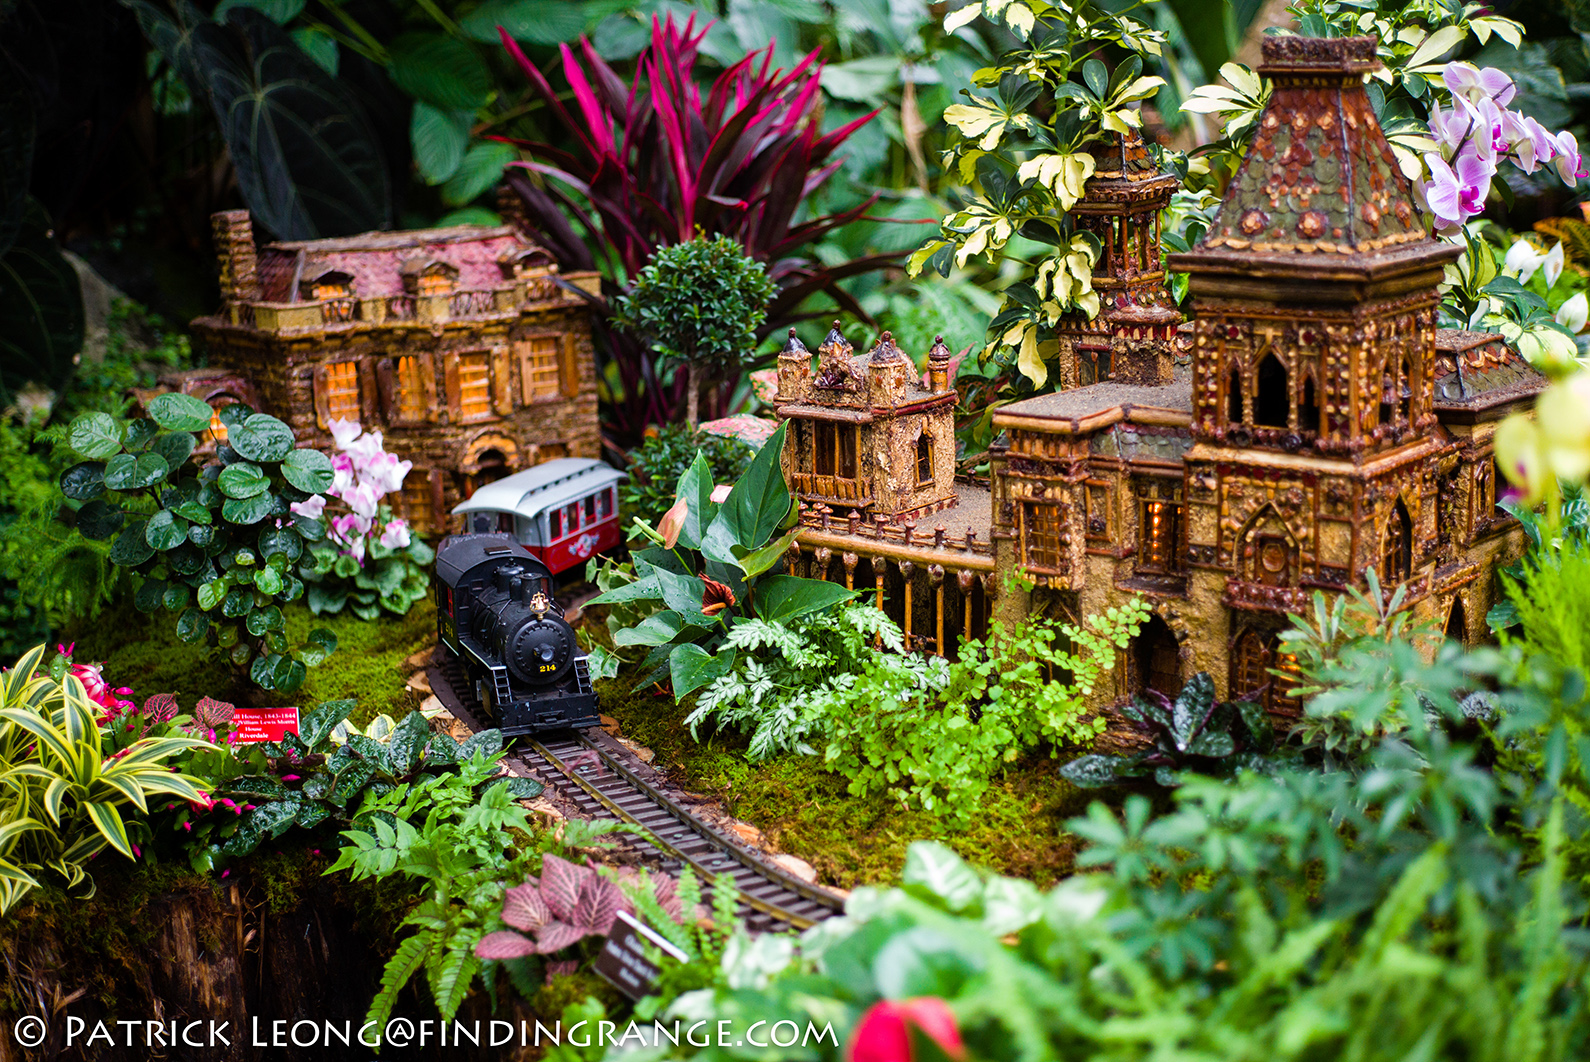 Holiday Train Show At The New York Botanical Garden